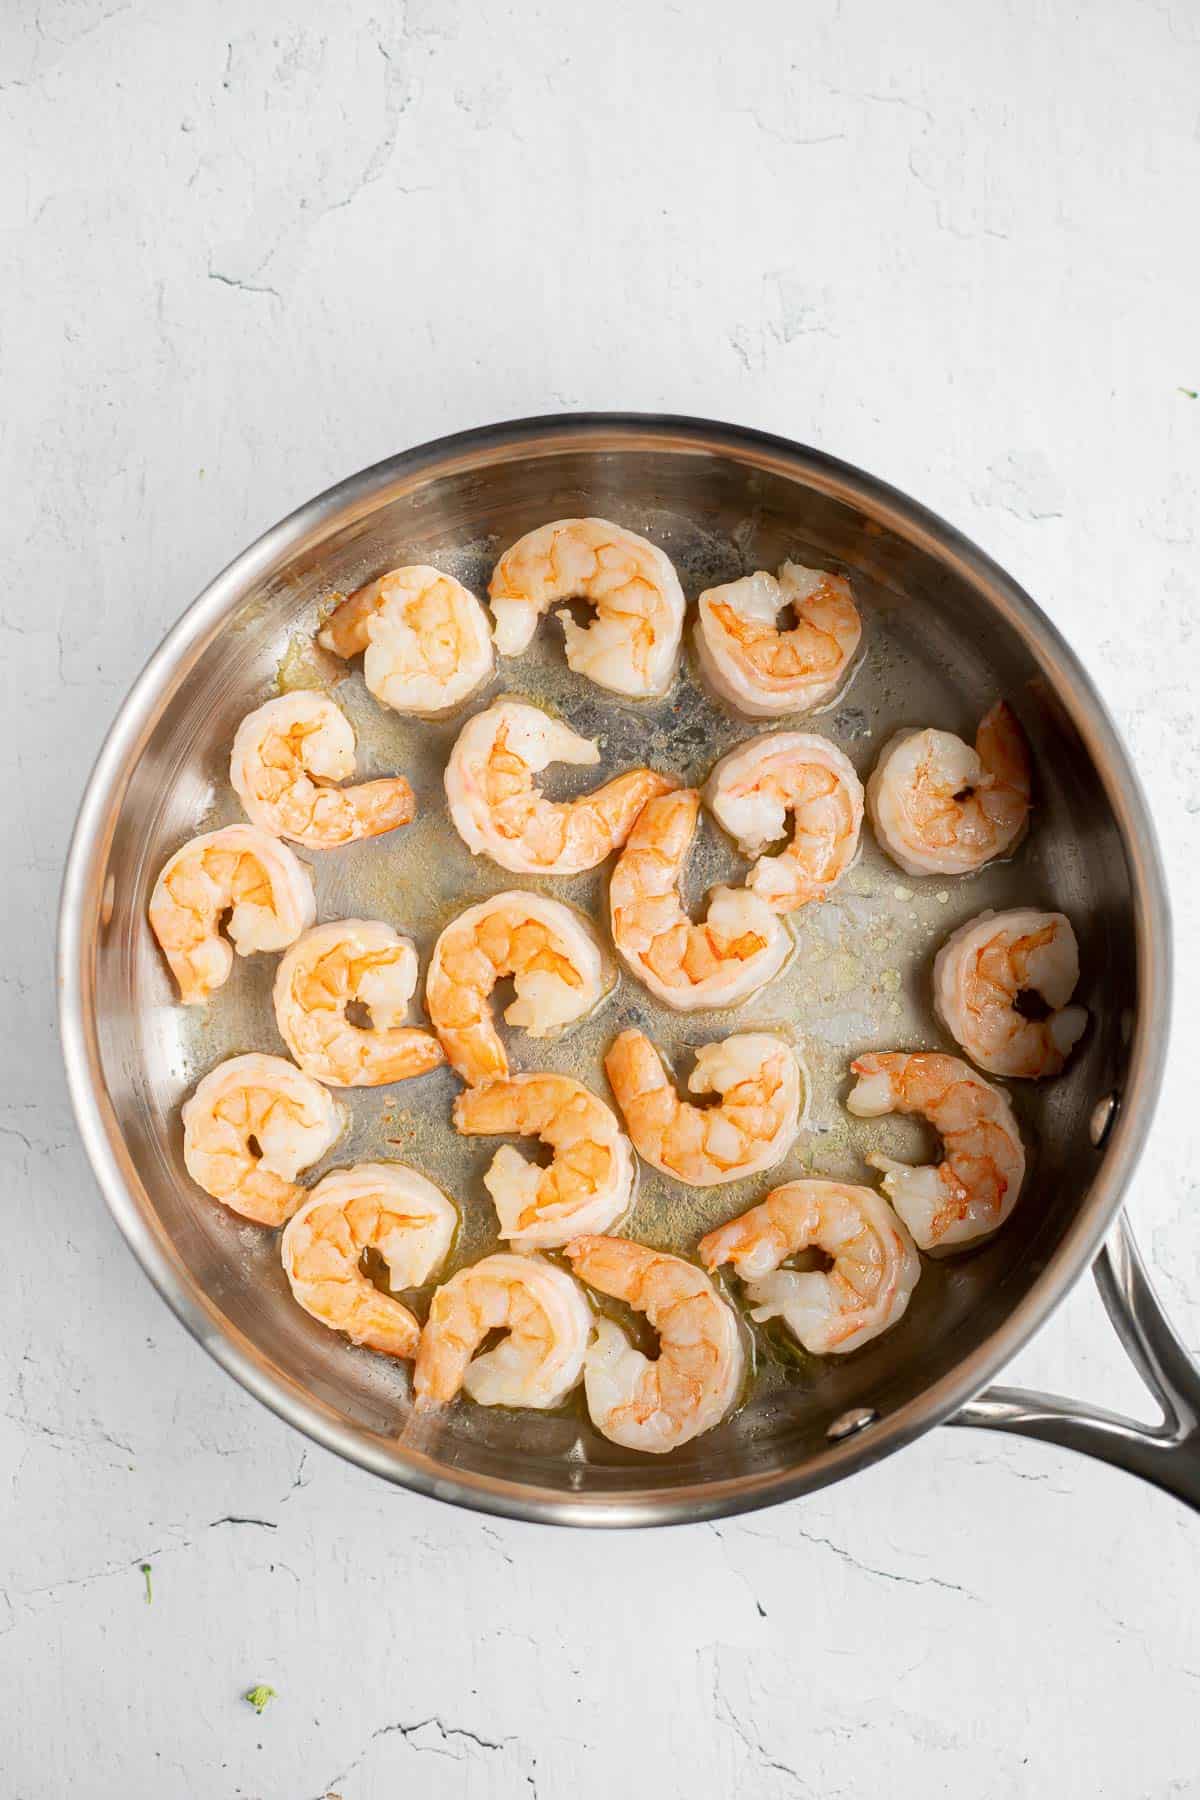 seared shrimp in a stainless steel pan.